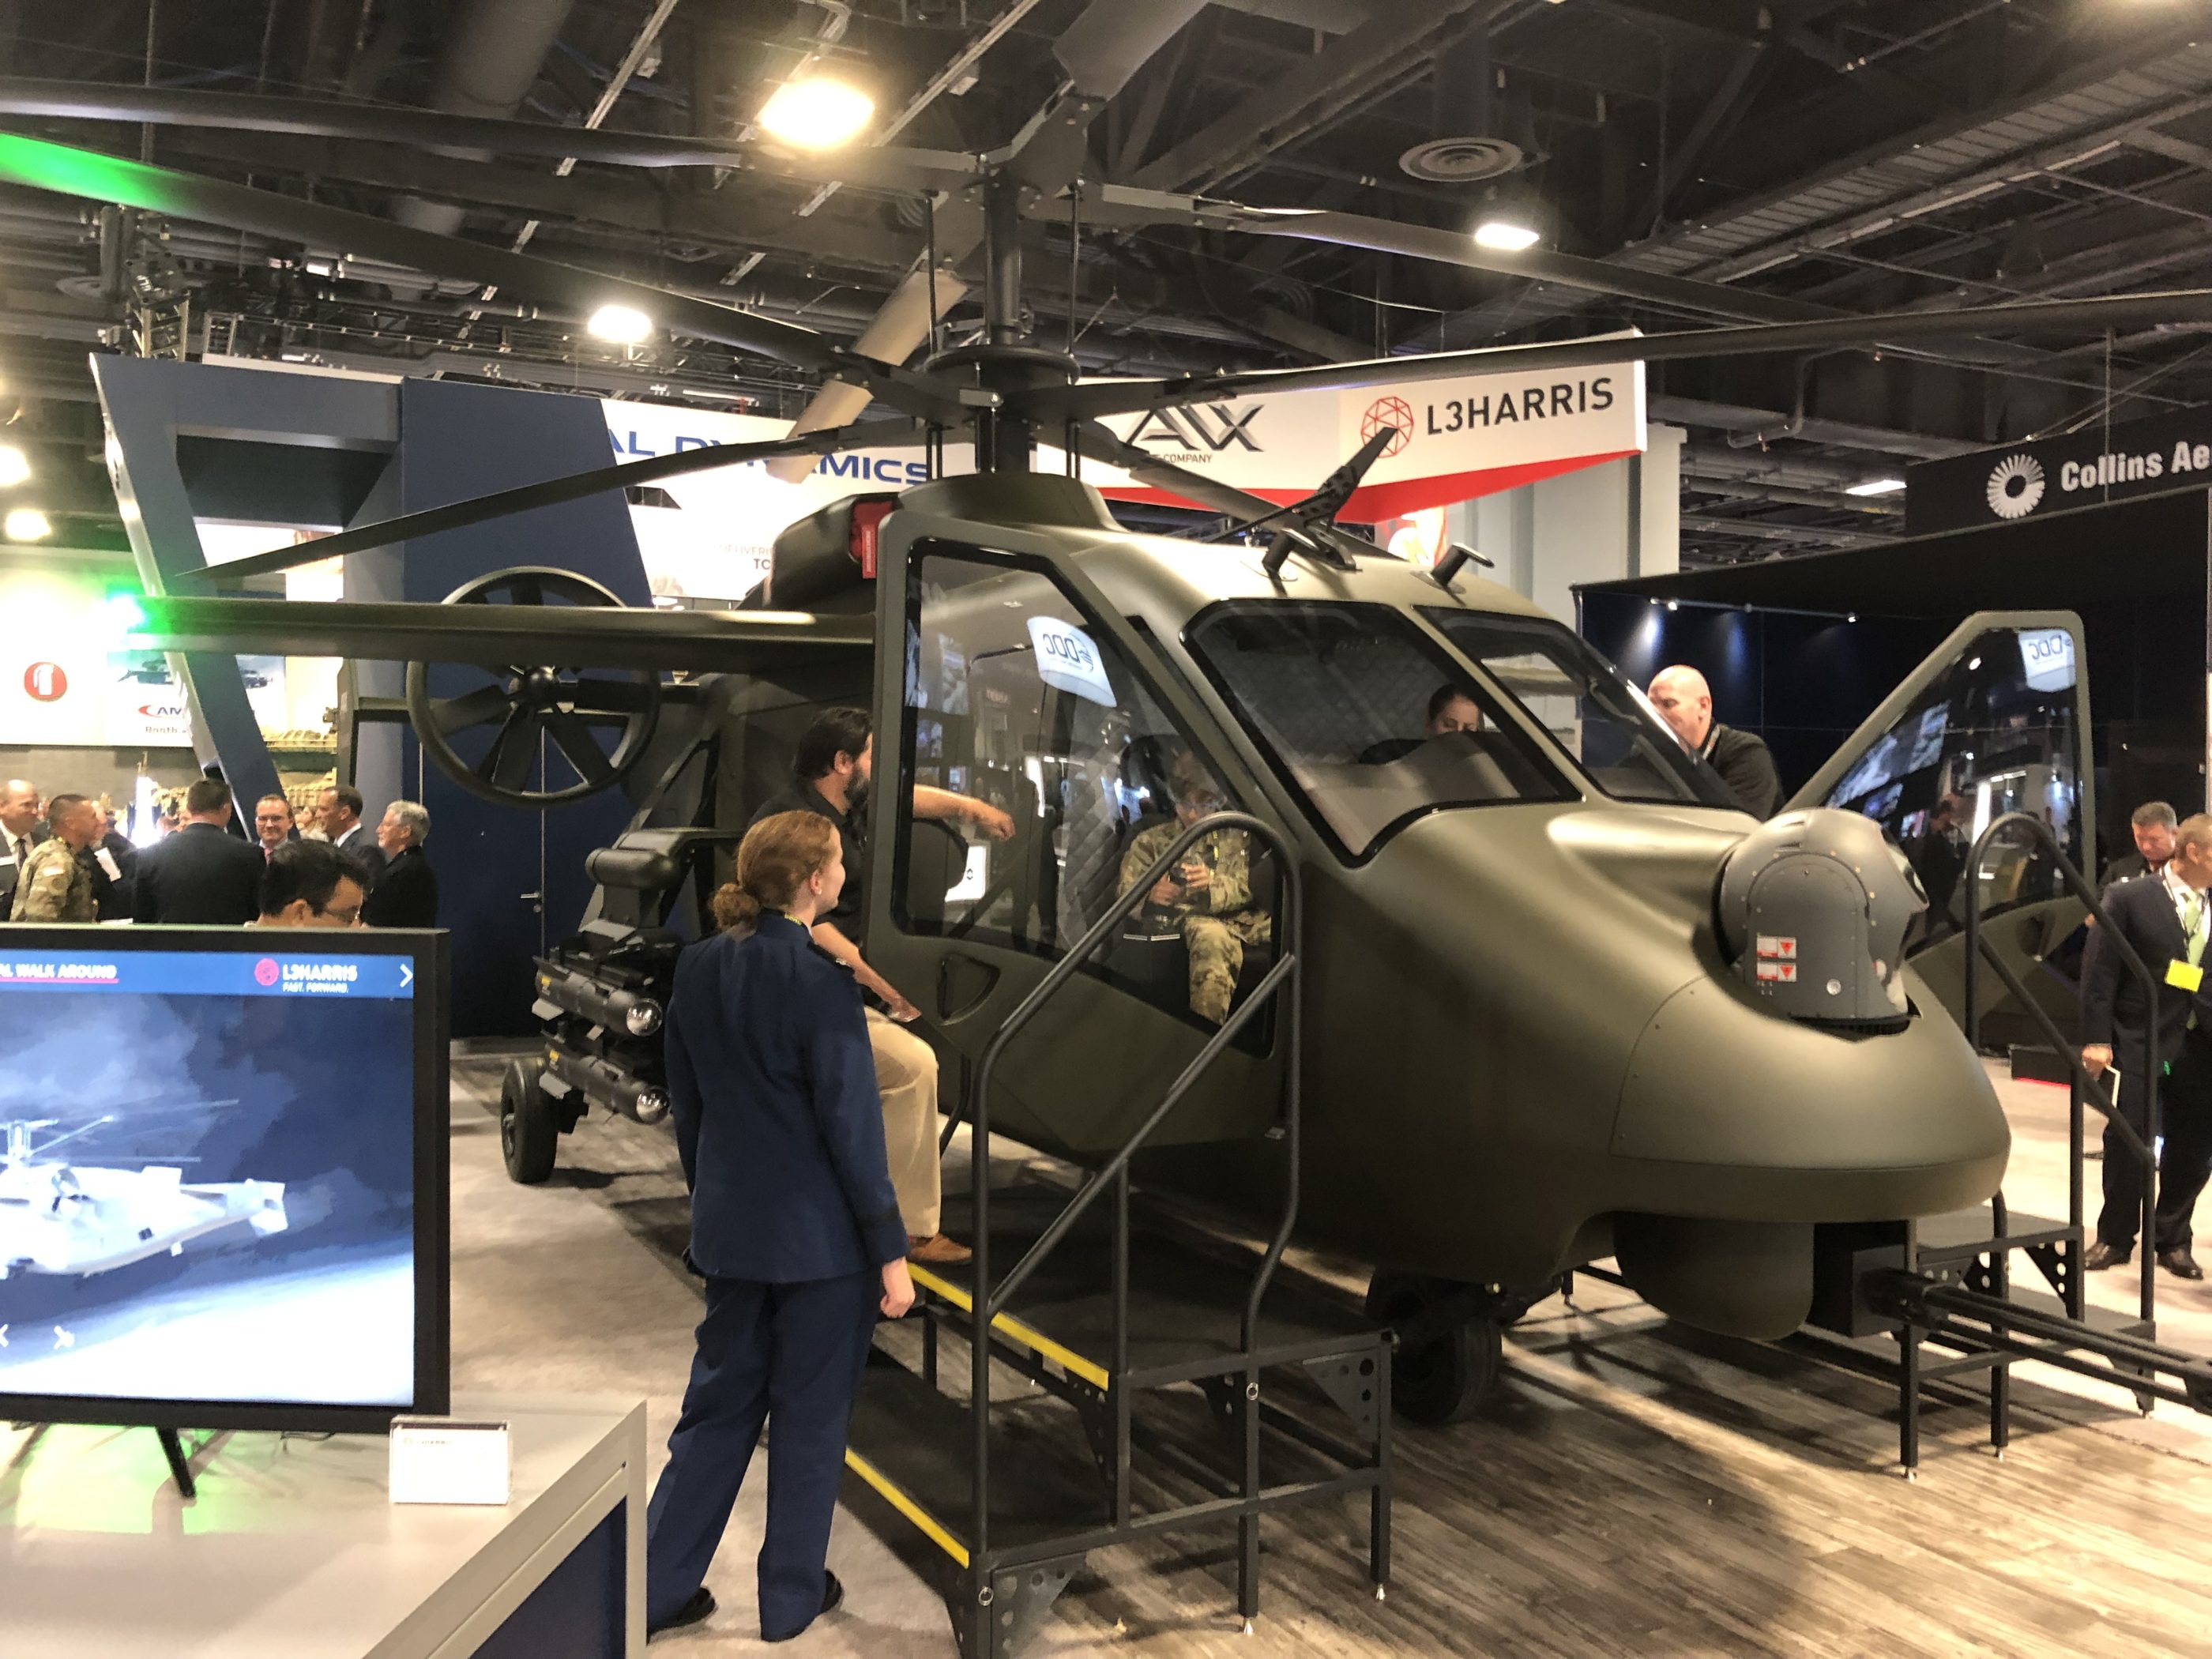 AVX/L3's Compound Coaxial Helicopter offering for the U.S. Army's FARA competition was unveiled at AUSA 2019. Dan Parsons Photo